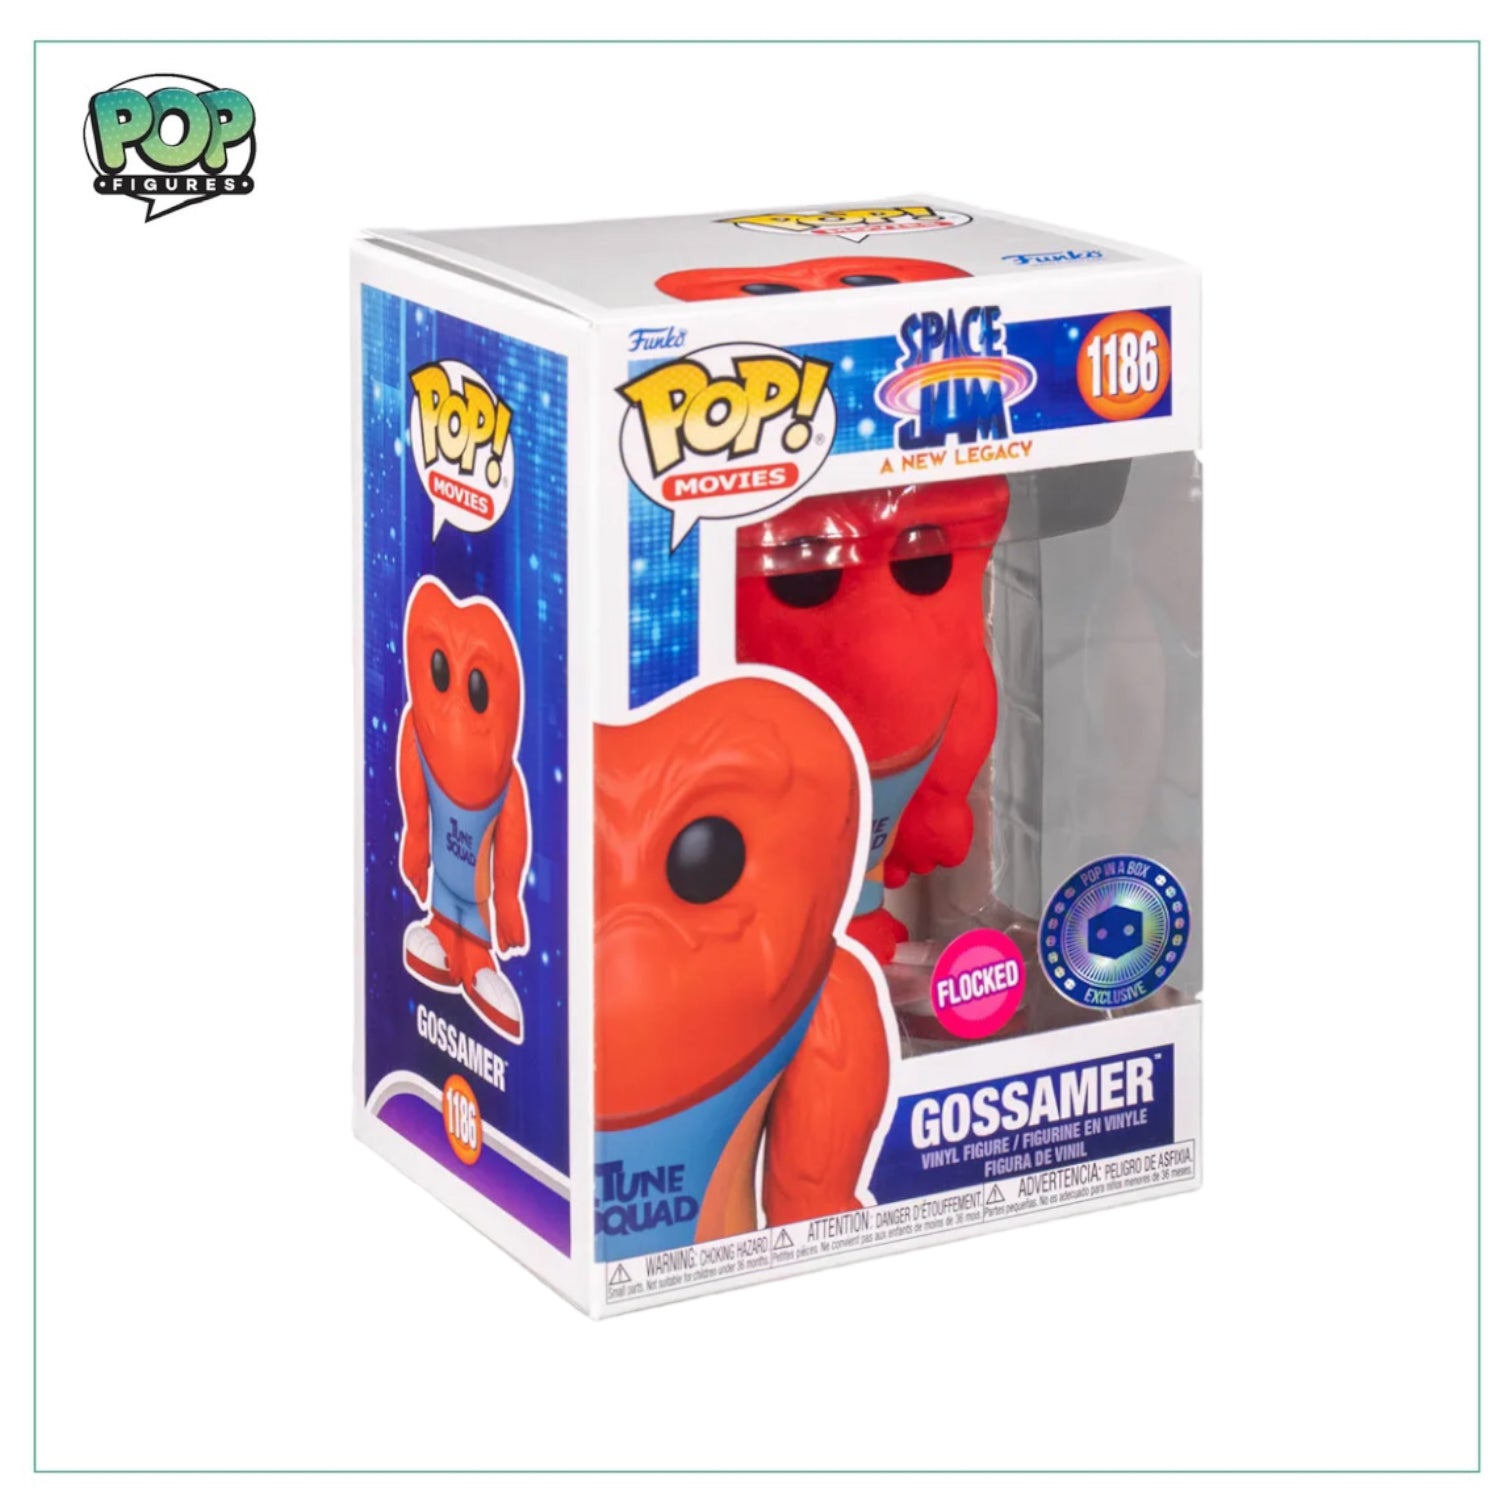 Gossamer #1186 (Flocked) Funko Pop! - Space Jame A New Legacy - Pop In A Box Exclusive